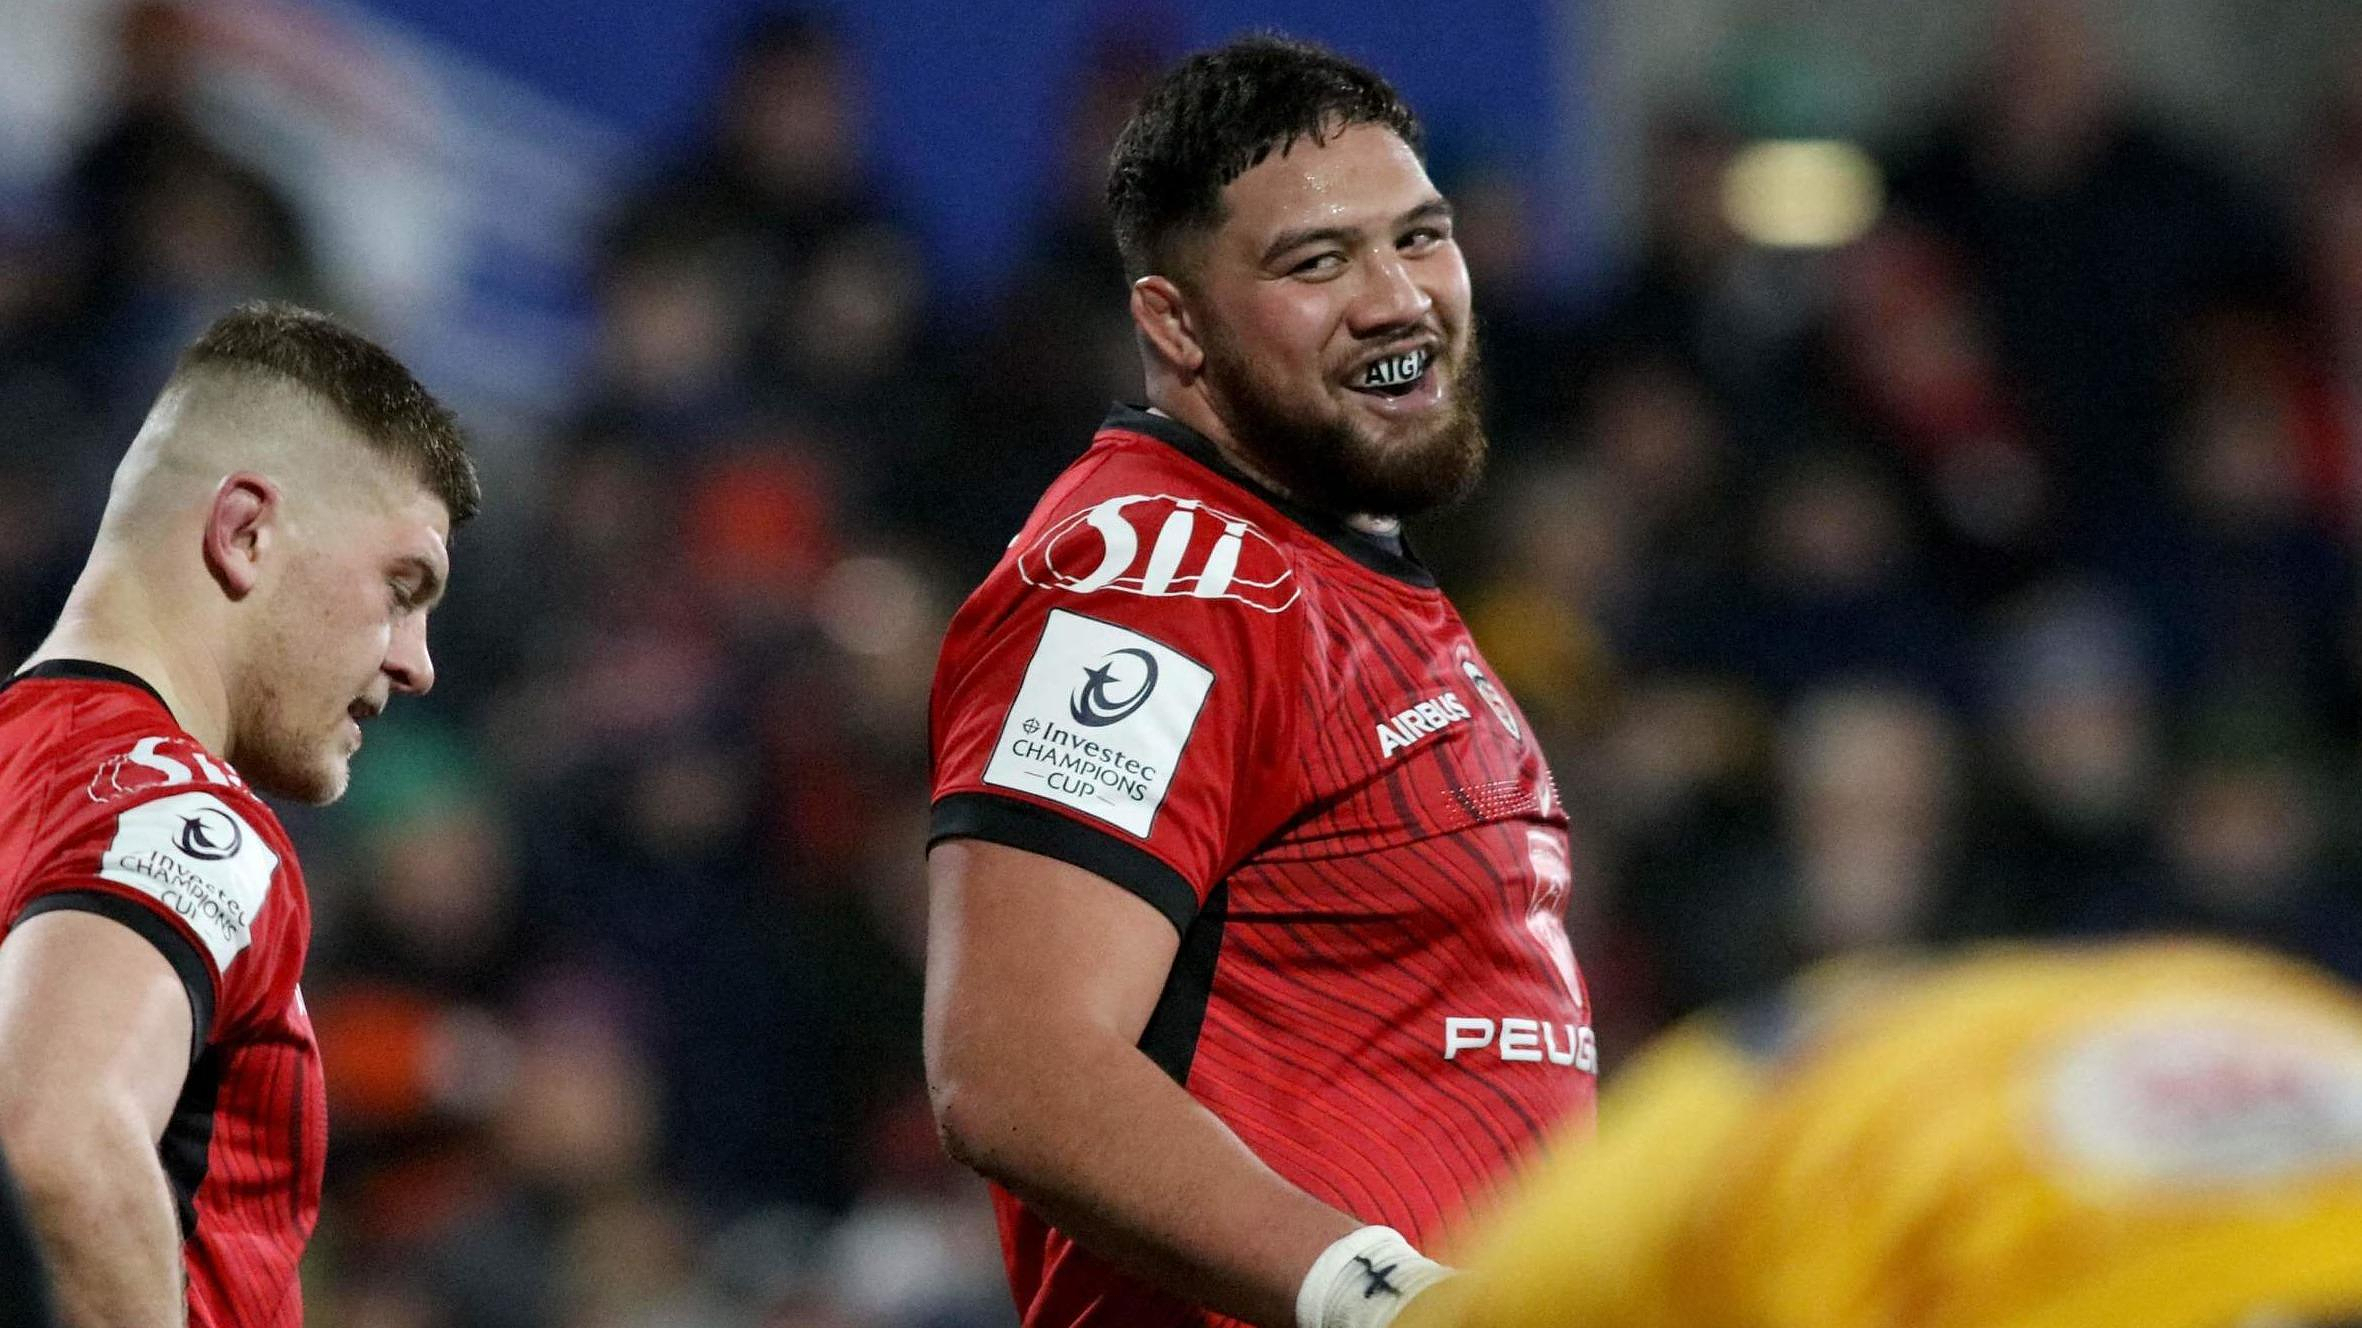 Top 14: Meafou and Flament (Stade Toulousain) not yet restored